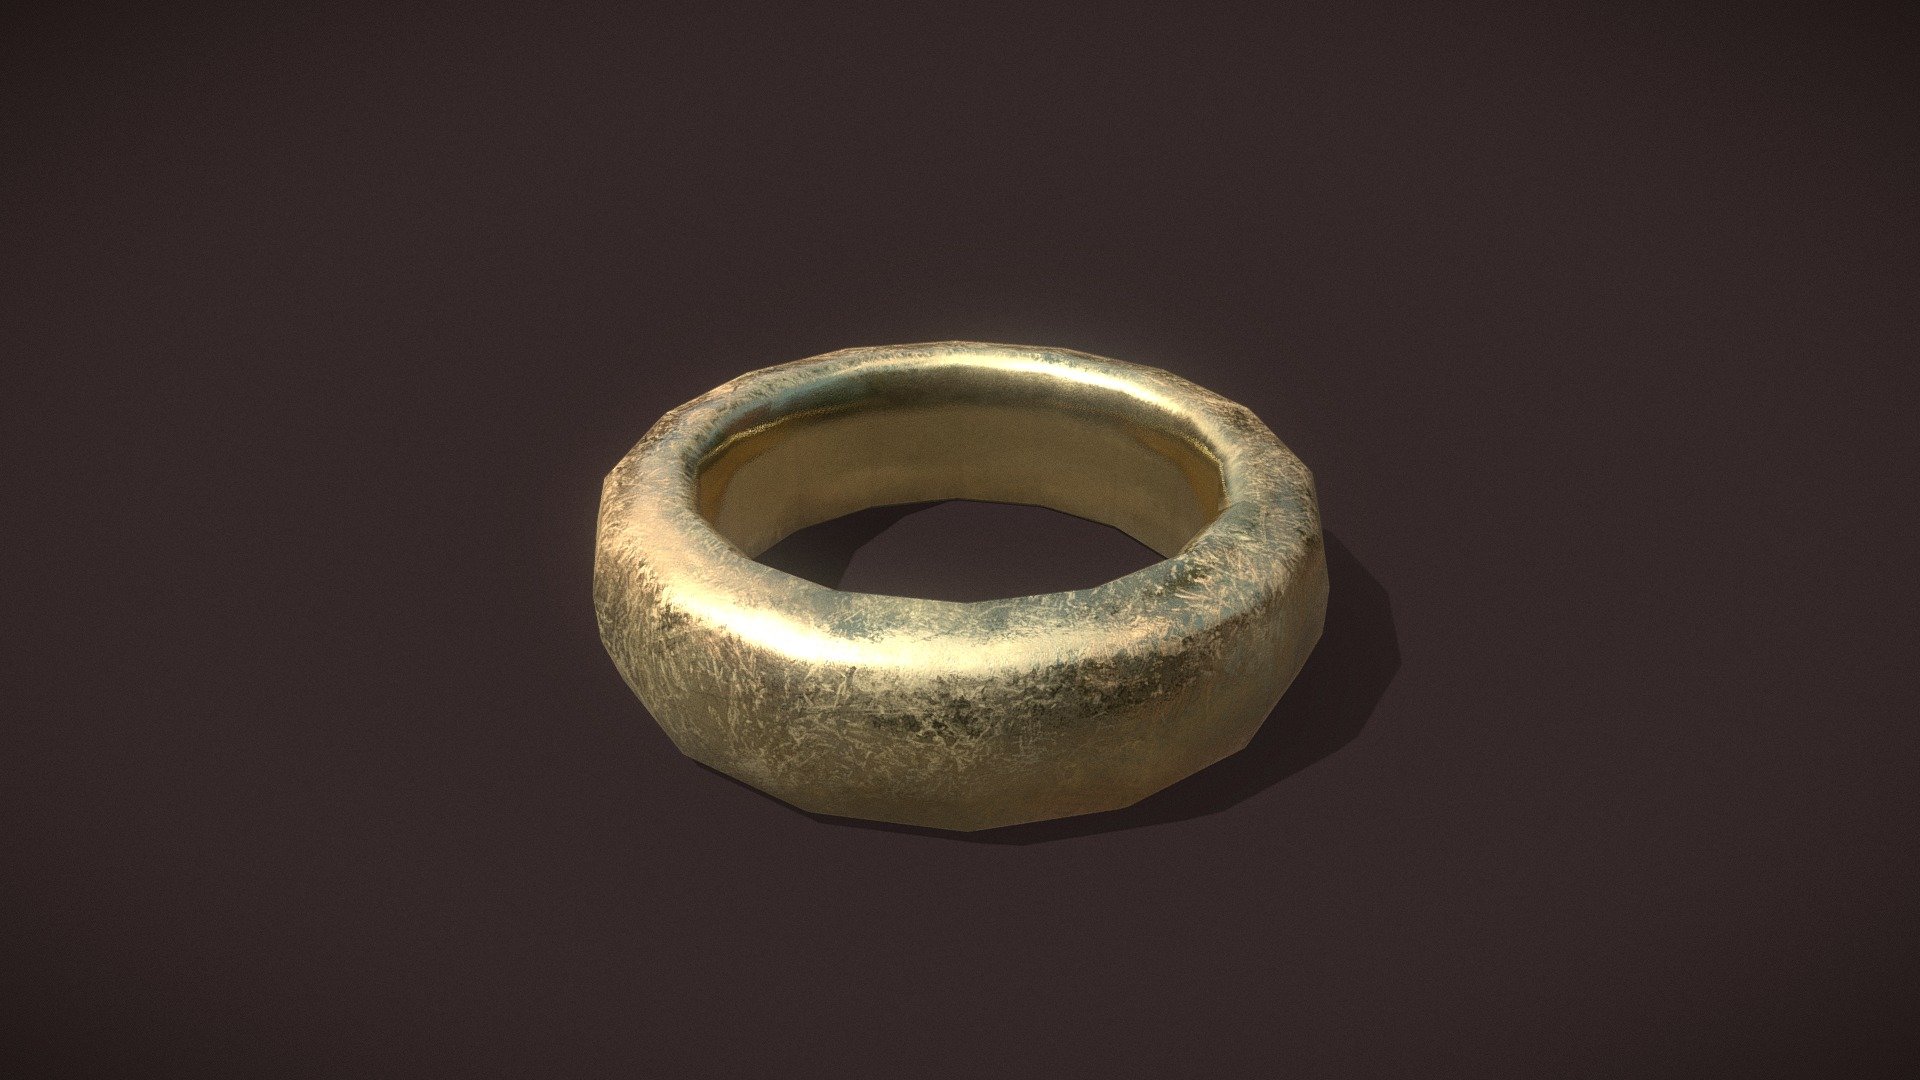 Simple Gold band Ring 3D Model.

PBR Texture in: 4096x4096 and 2048x2048

All Preview Renders were done in Marmoset Toolbag 3.06.

If you like it, please give us a like and a follow. :) - Gold Band Ring - Download Free 3D model by GetDeadEntertainment 3d model